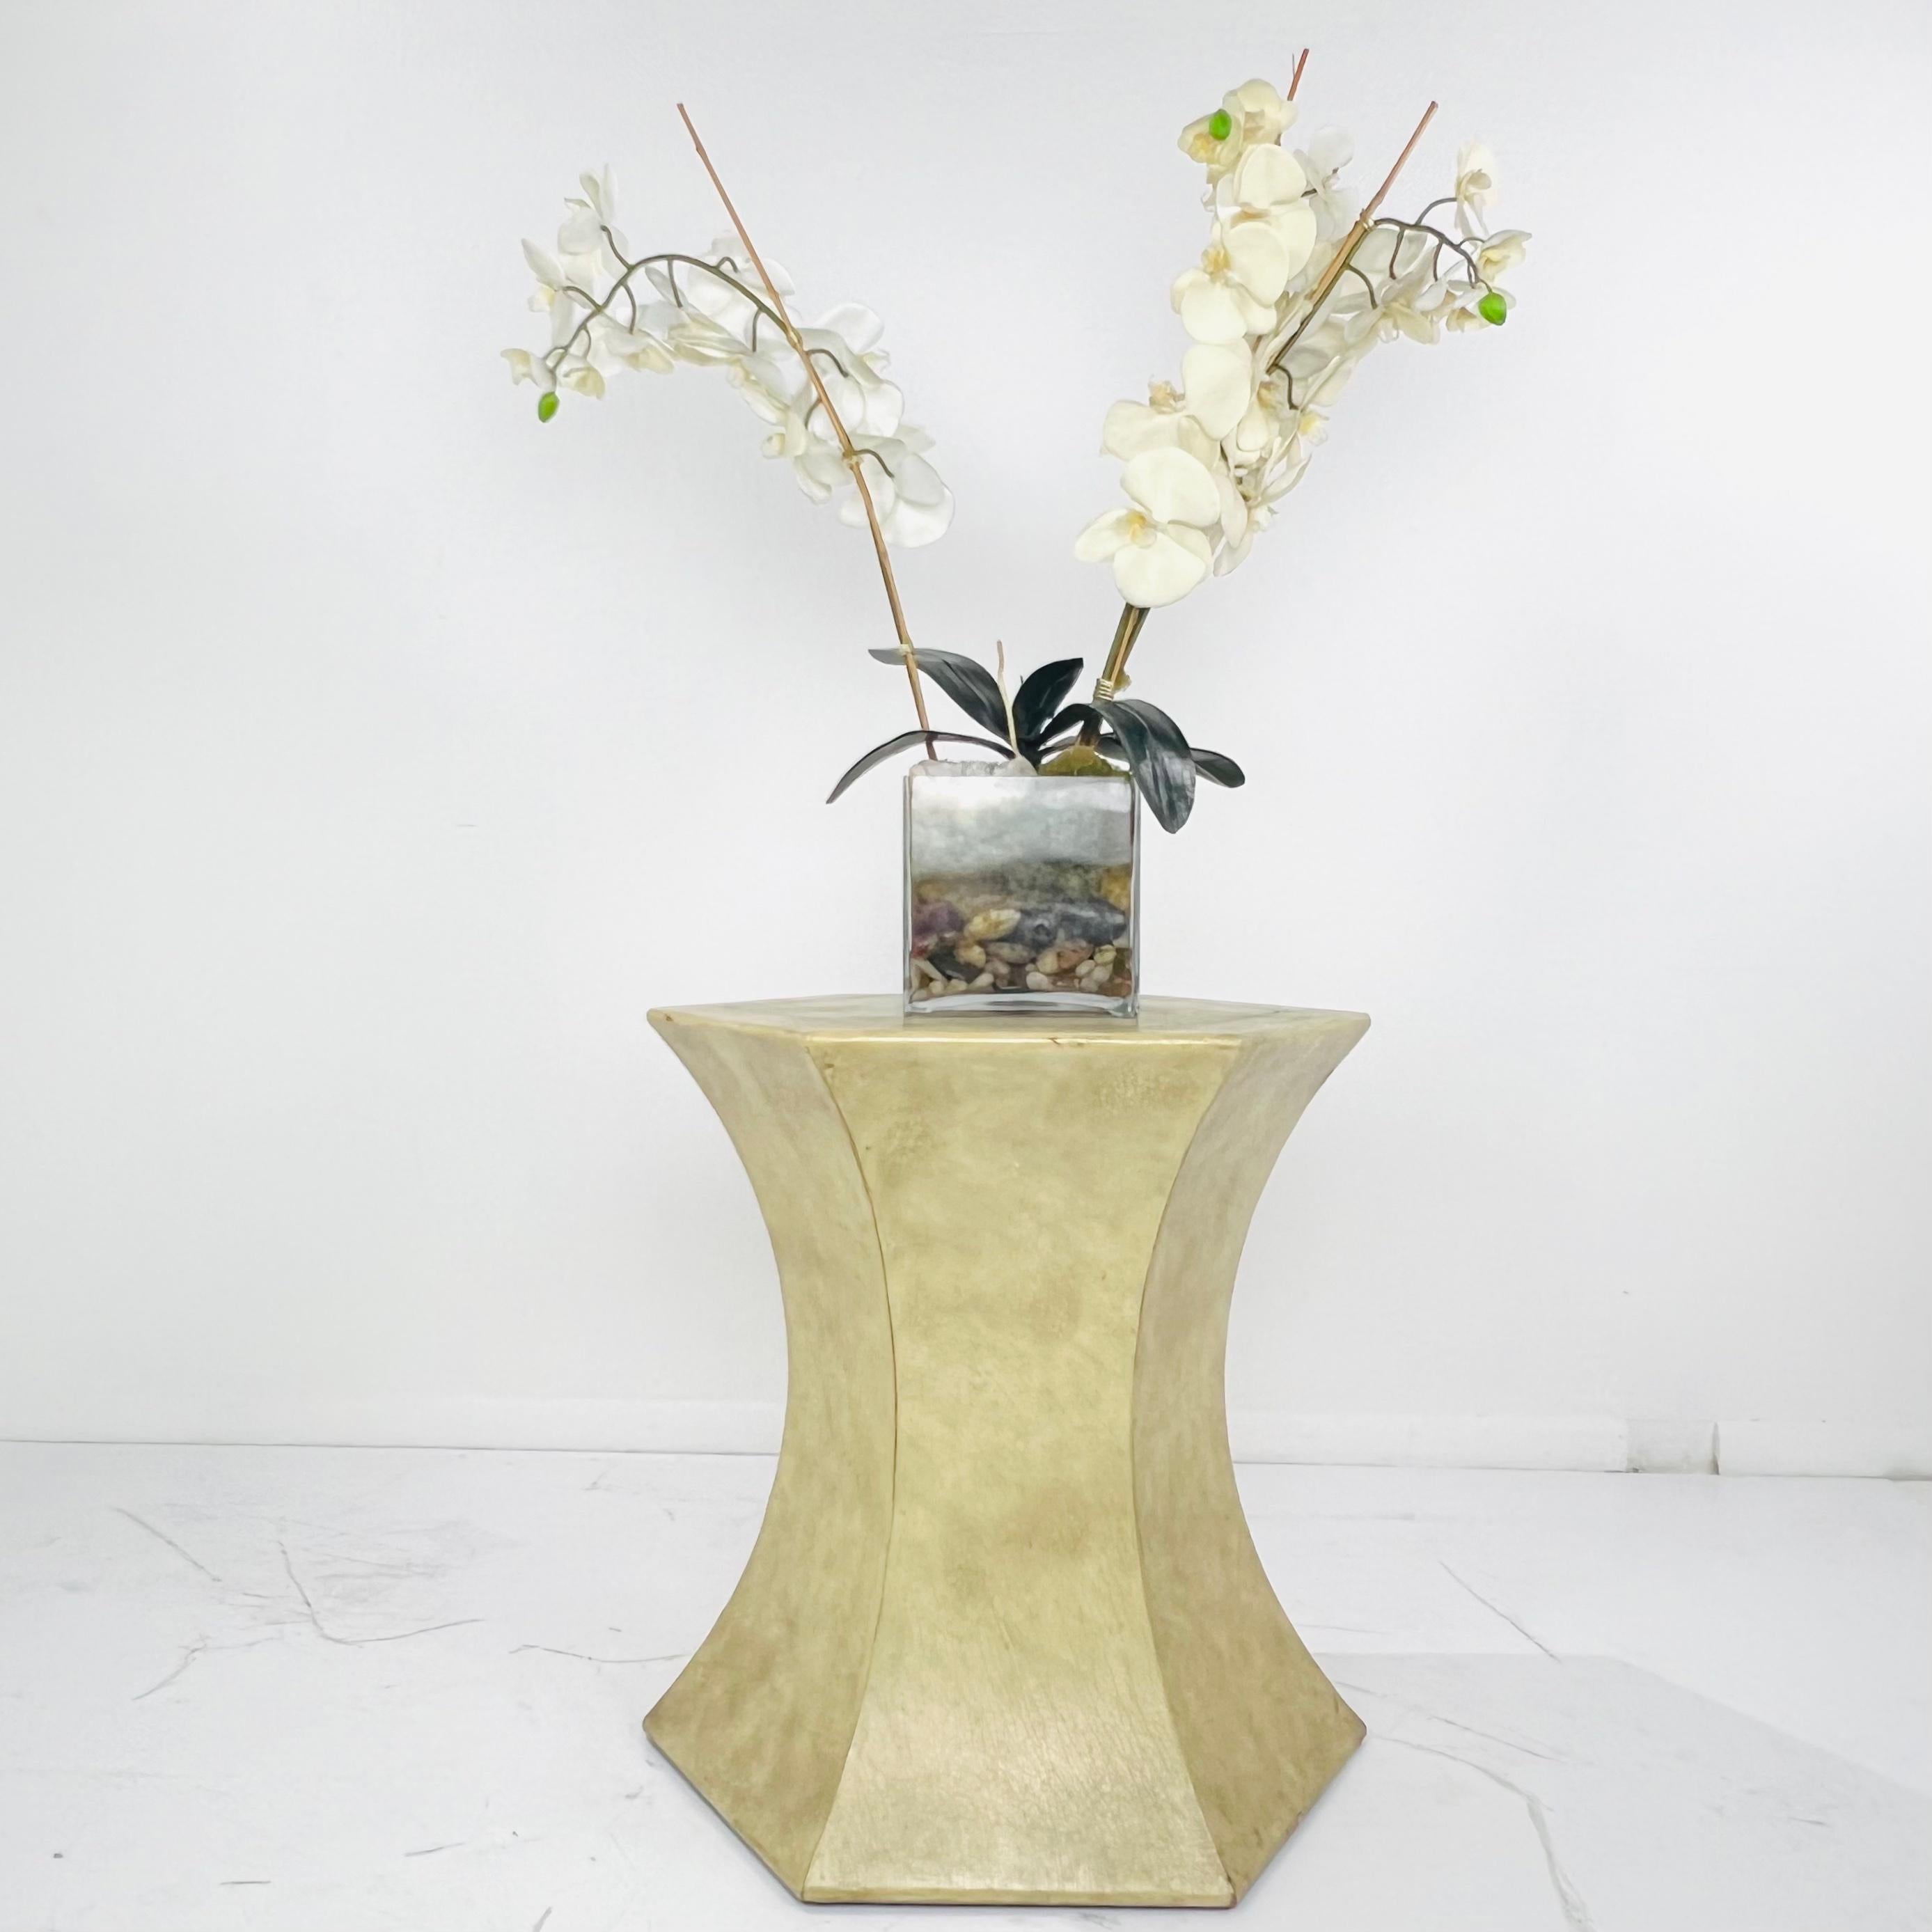 Elegant, classic Maitland-Smith glazed leather pedestal with faux elephant hide finish and gold embossed details. A handsome statement in both traditional and modern settings. Good sturdy vintage condition with some cosmetic imperfections including